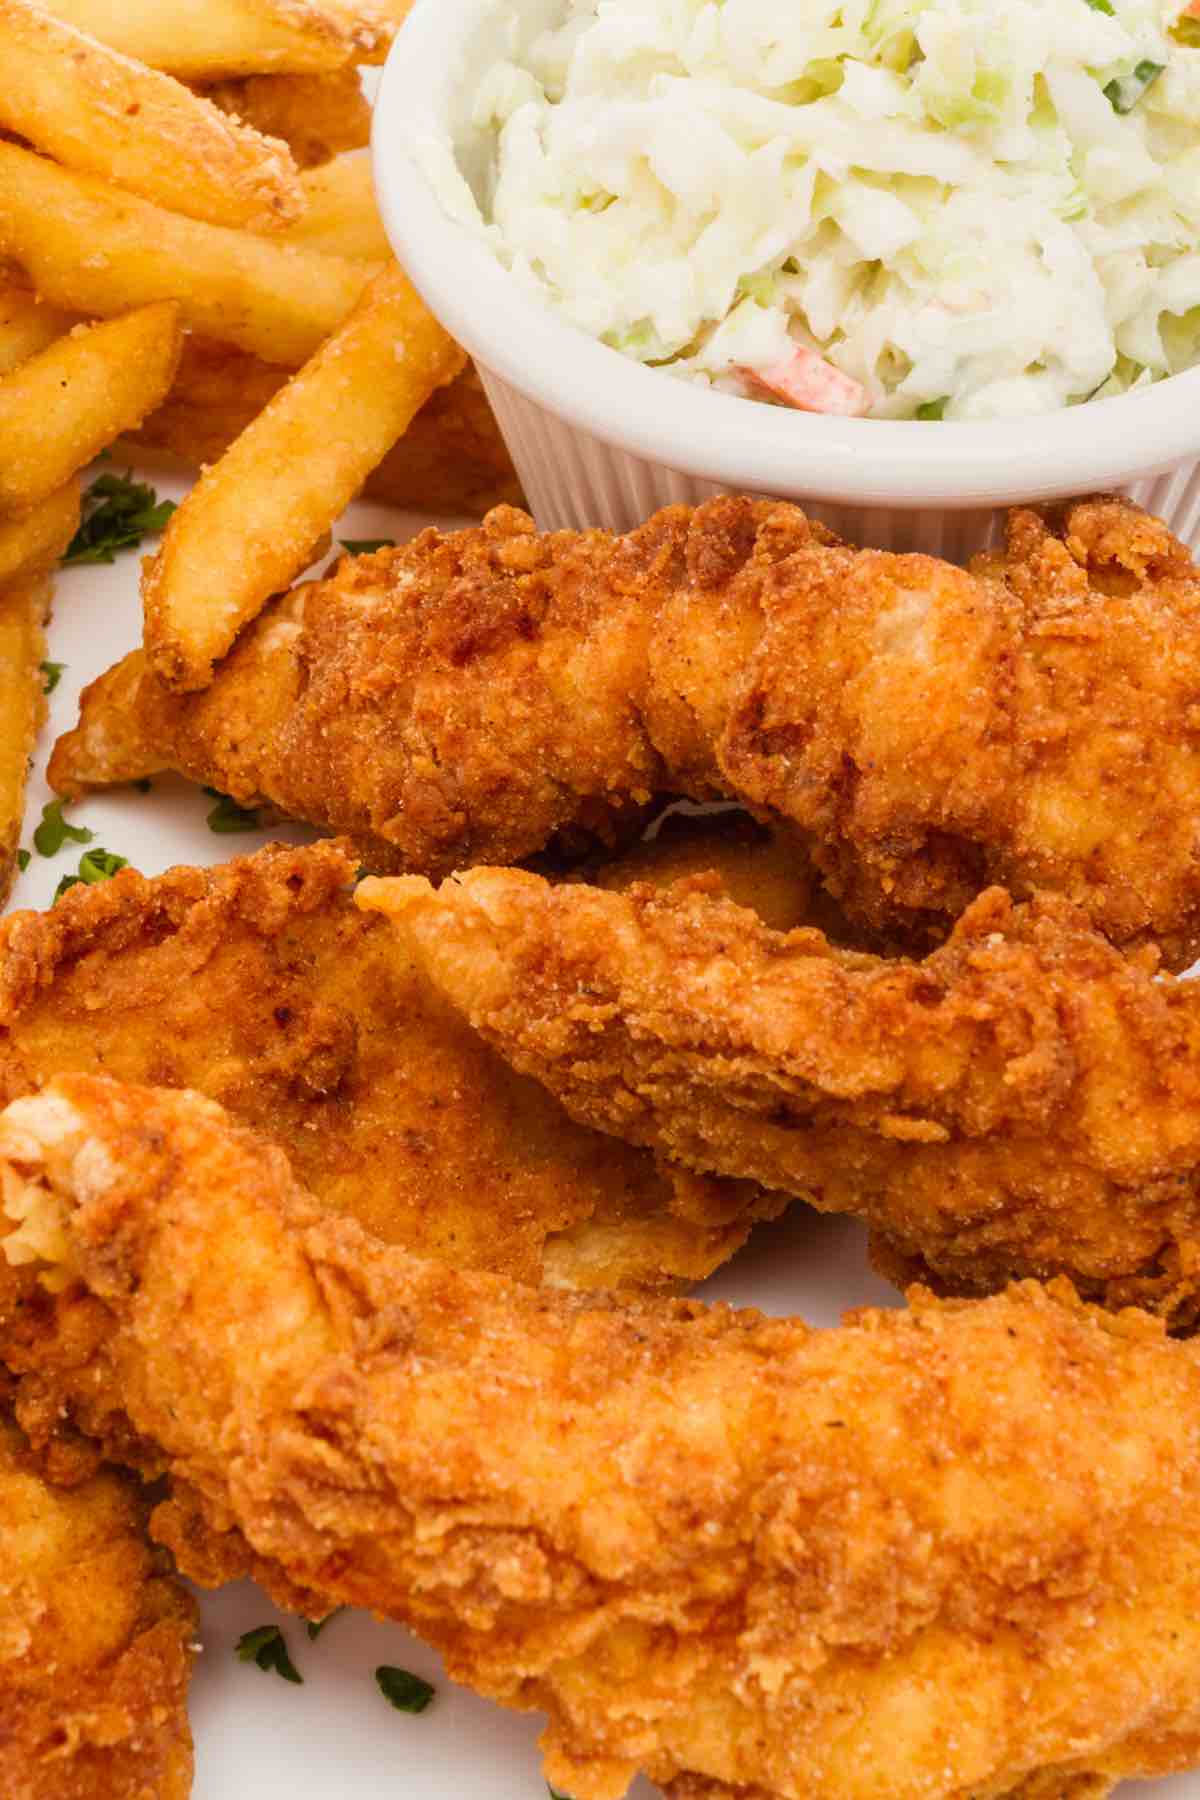 Is there anything more authentic than a Southern meal made with fried chicken? How about the best sides to go with it? Just imagine that crisp piece of fried chicken smothered in gravy and served with a perfect side! Below you will find 21 of the Best Fried Chicken Sides that range from healthy to picnic style! Choose one or two to make it a complete Southern meal!